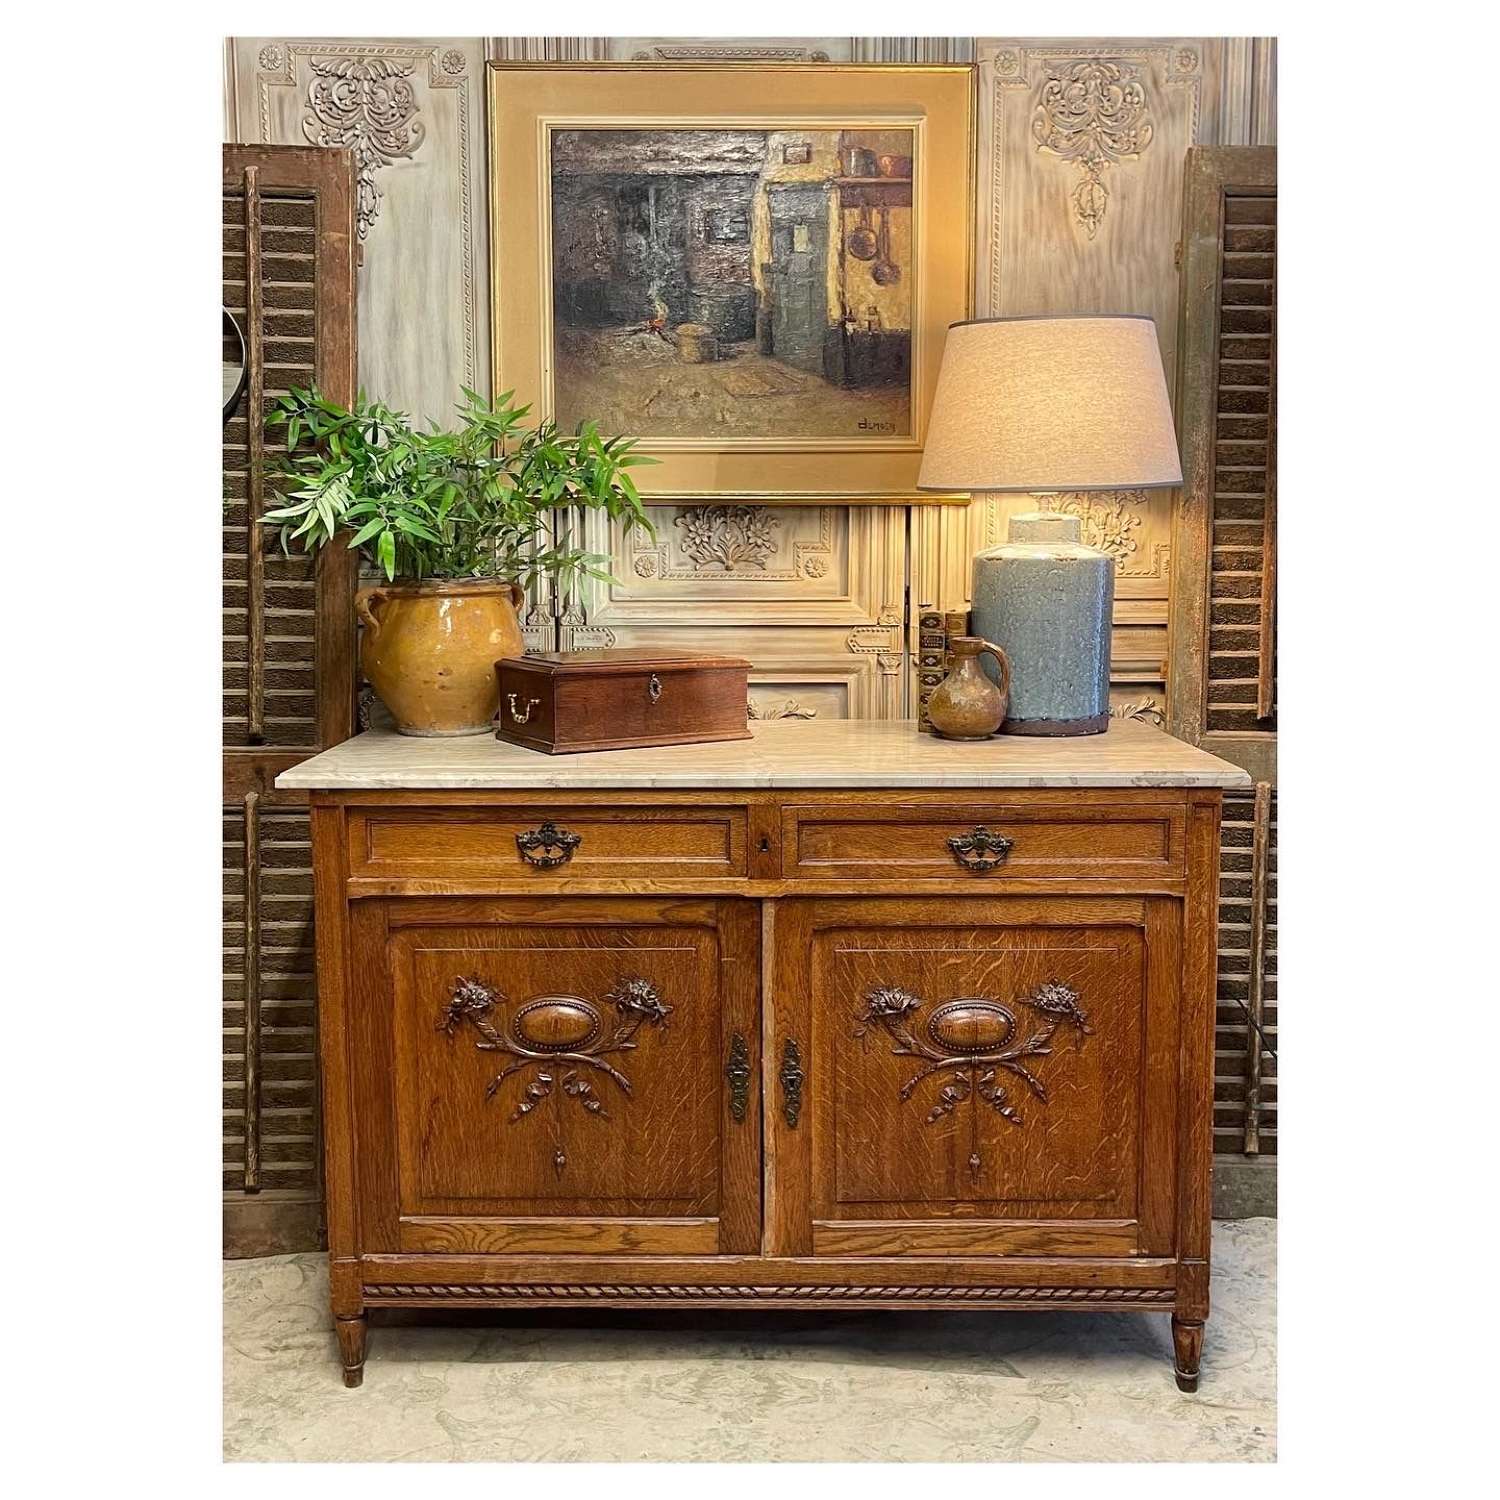 Rustic French cupboard with Marble top